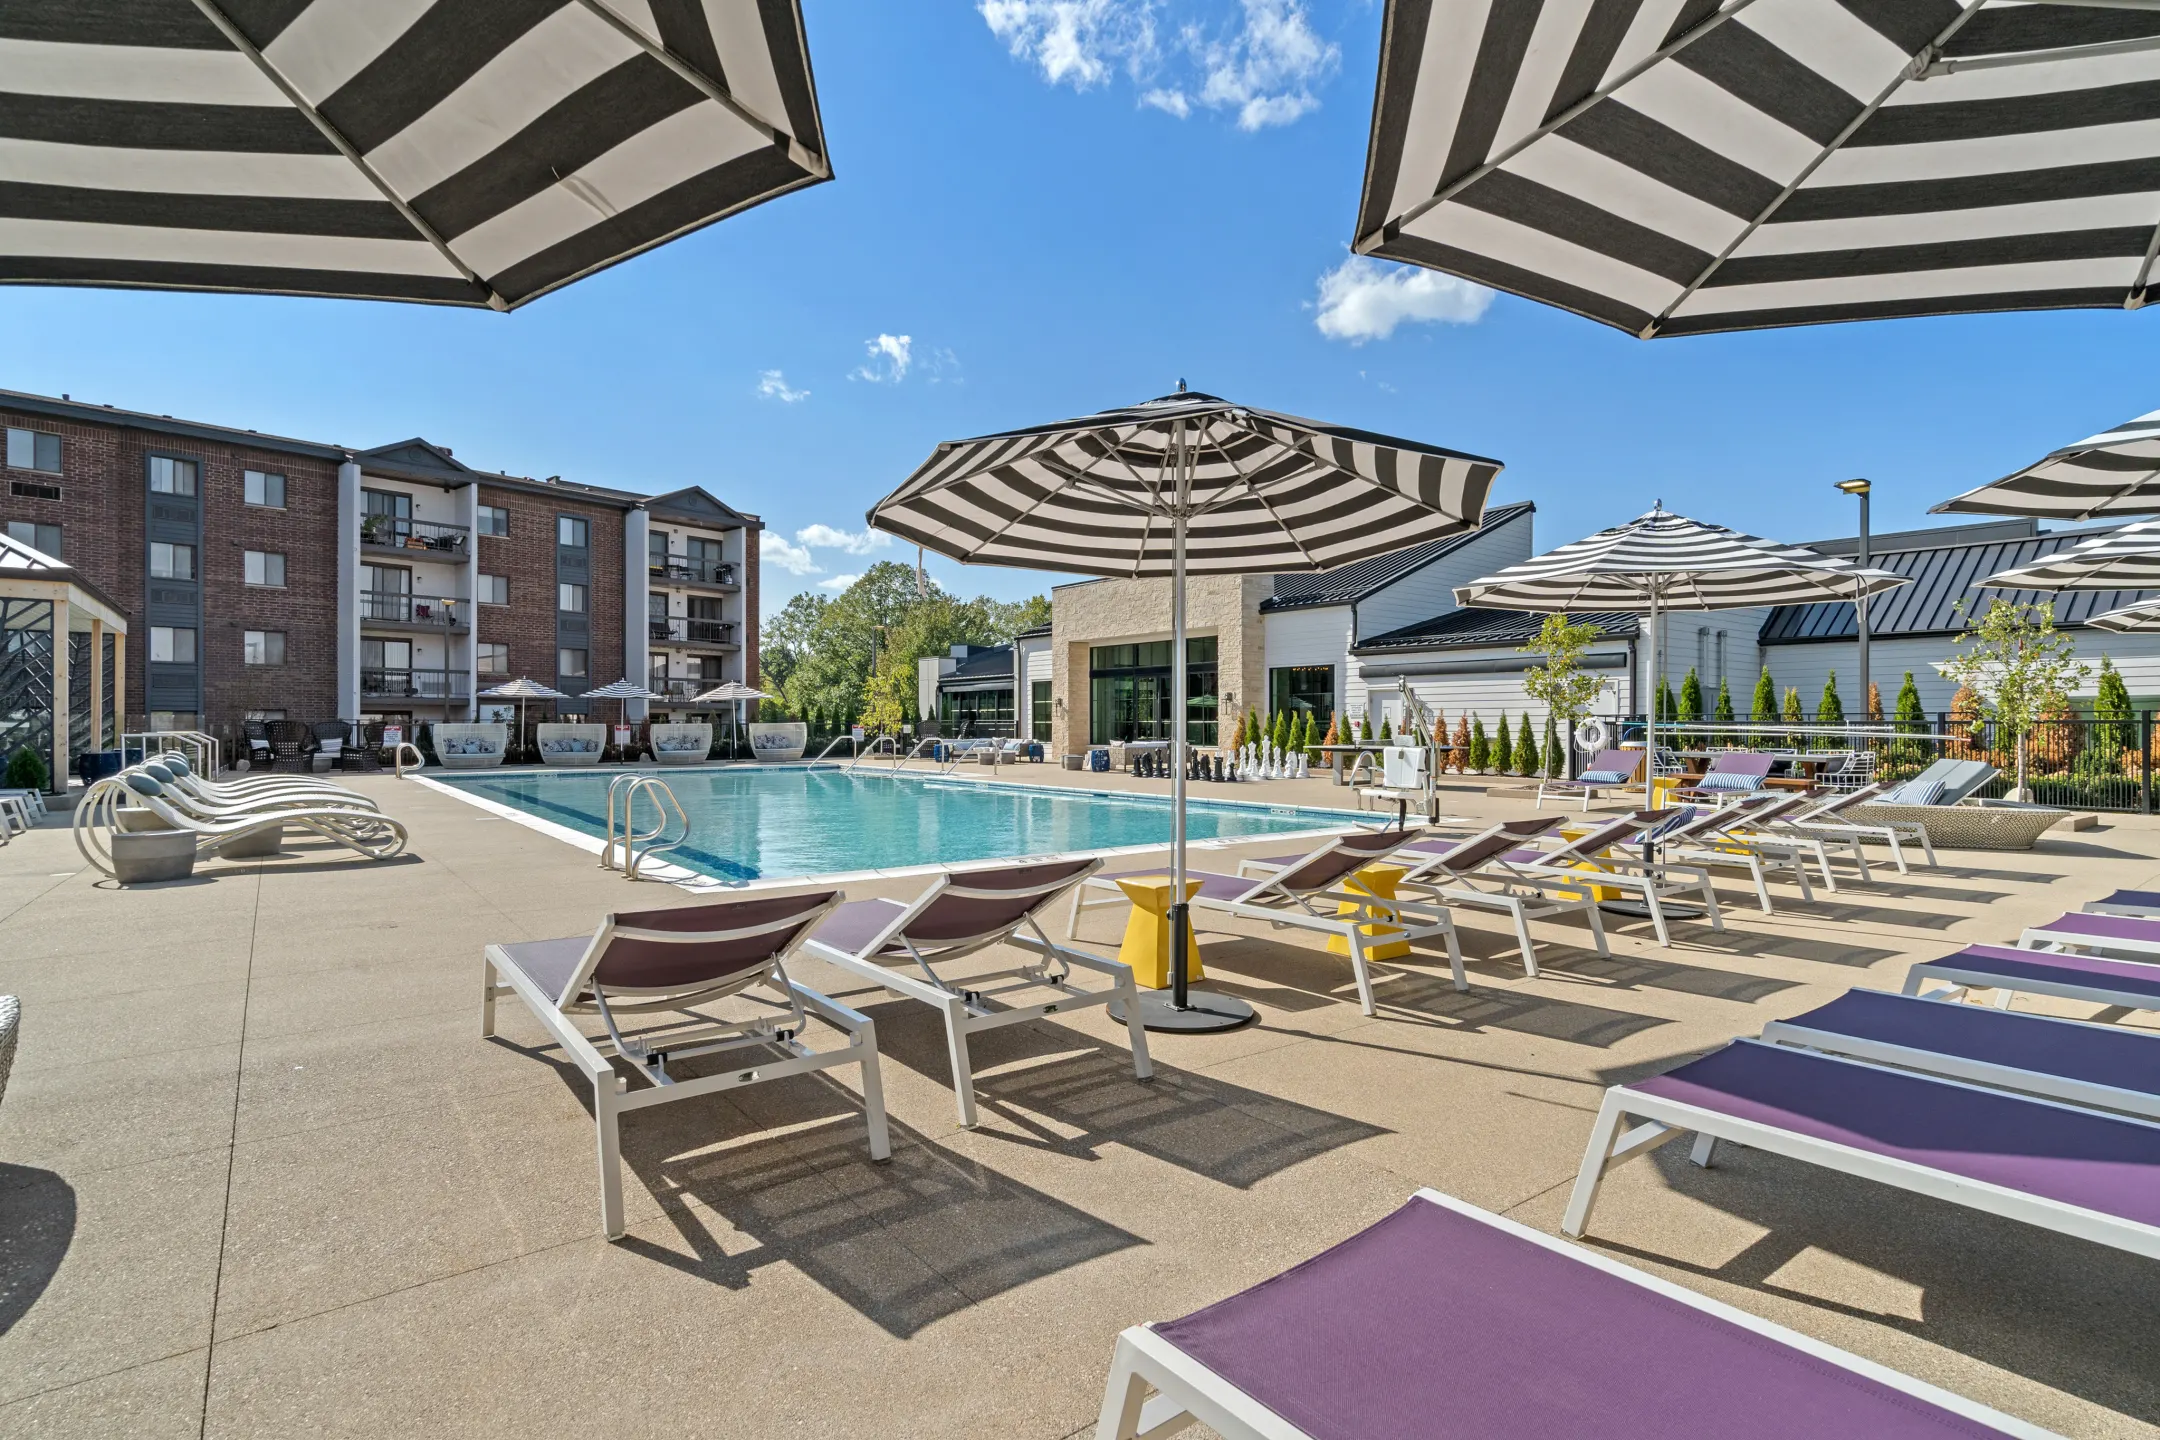 Pool - Residences at Lakeside - Lombard, IL